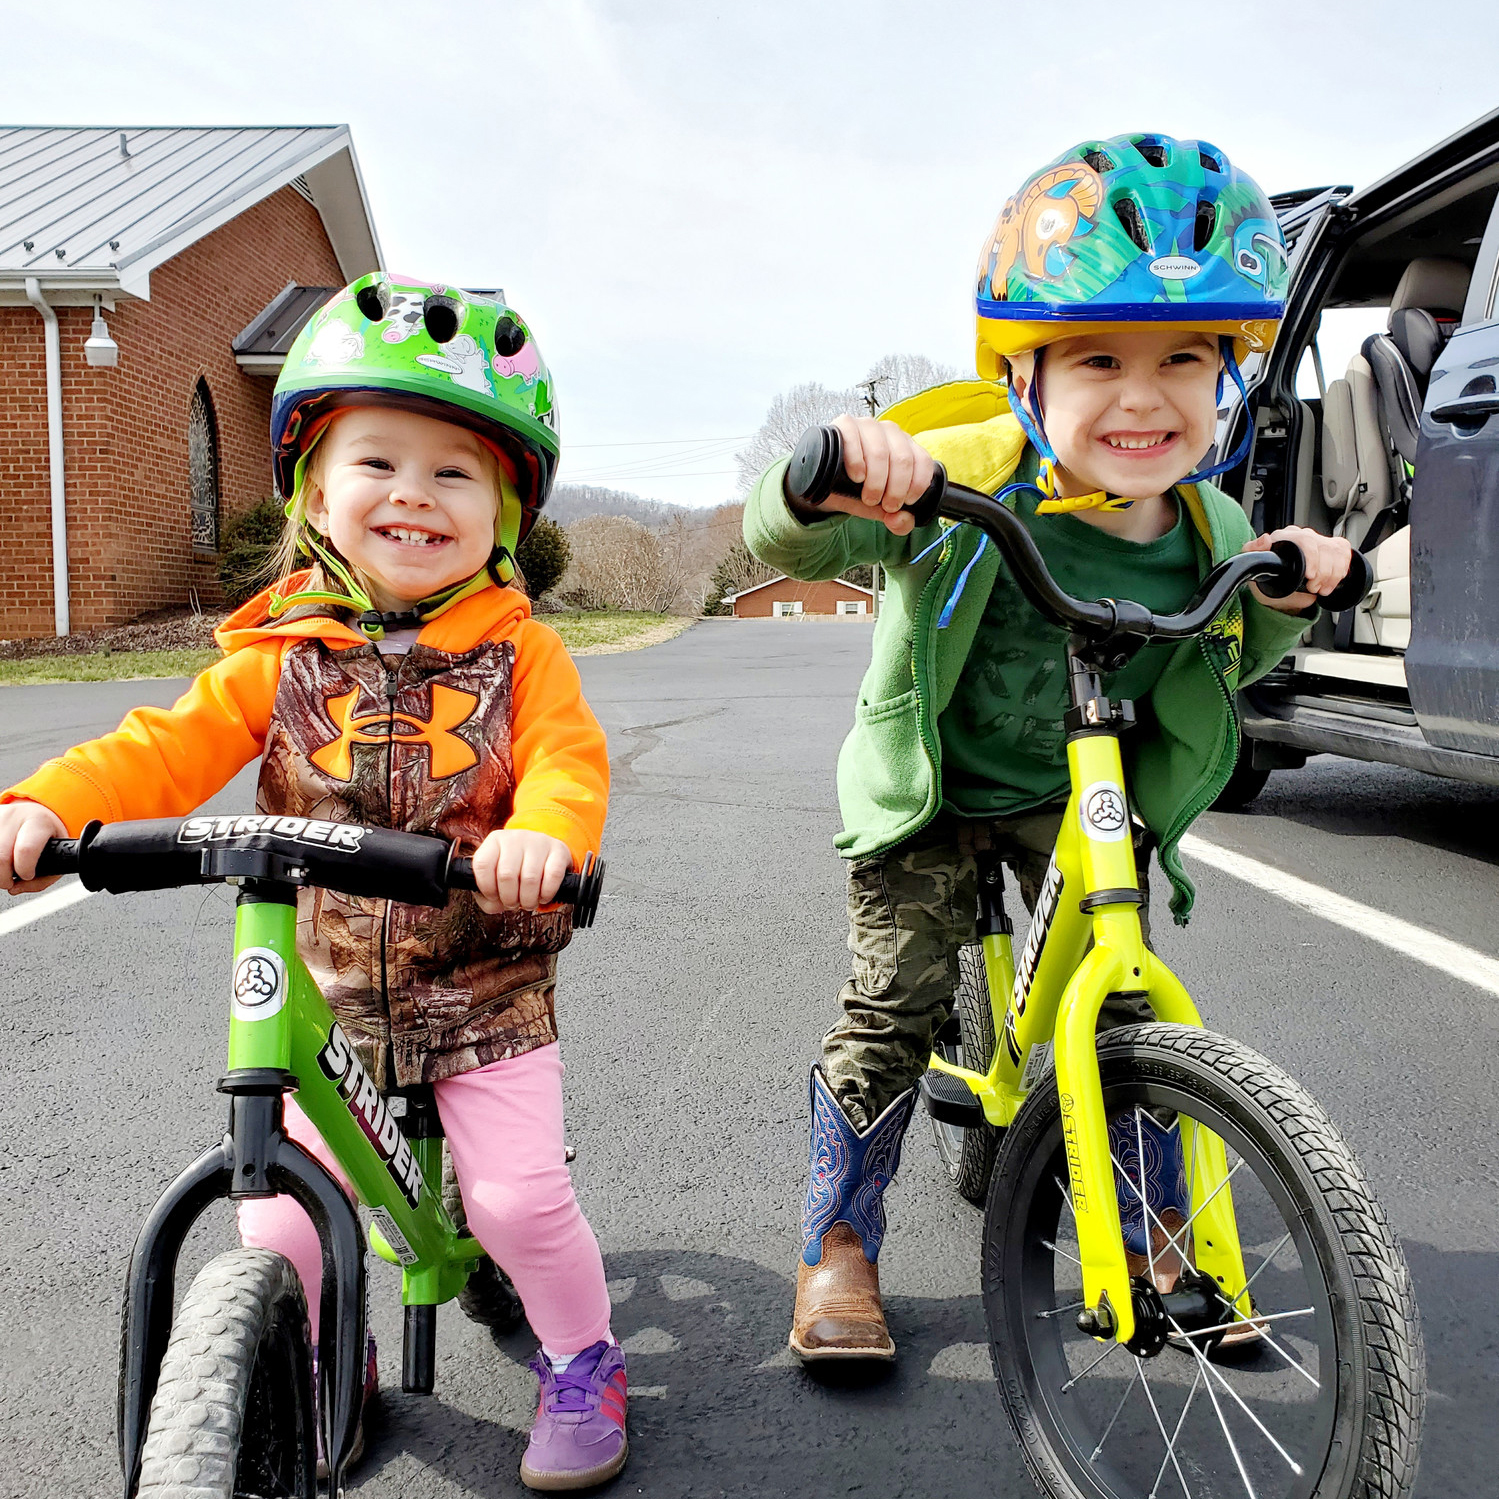 Learning to pedal a bicycle builds confidence in children